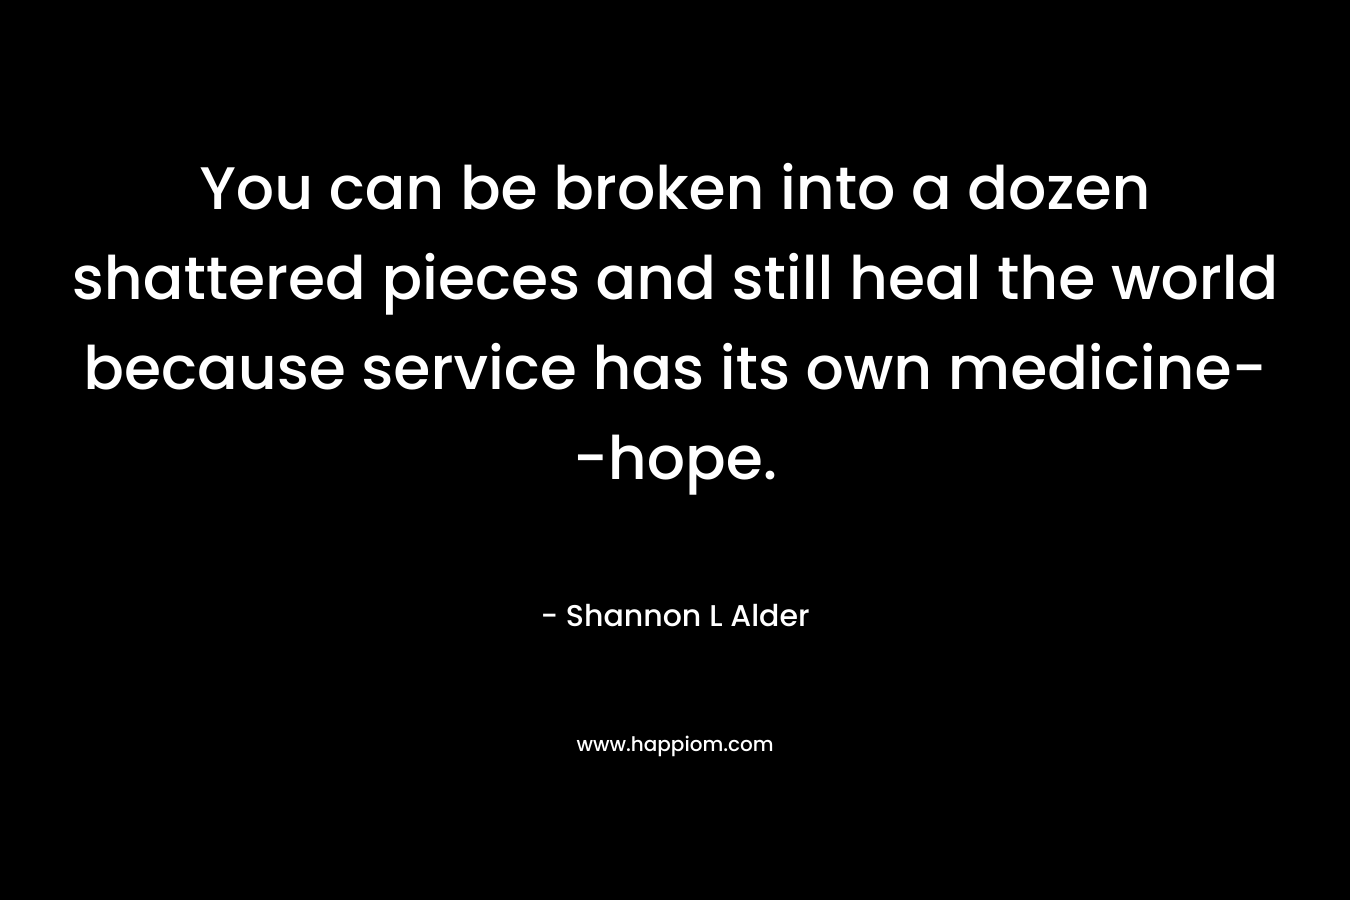 You can be broken into a dozen shattered pieces and still heal the world because service has its own medicine–hope. – Shannon L Alder